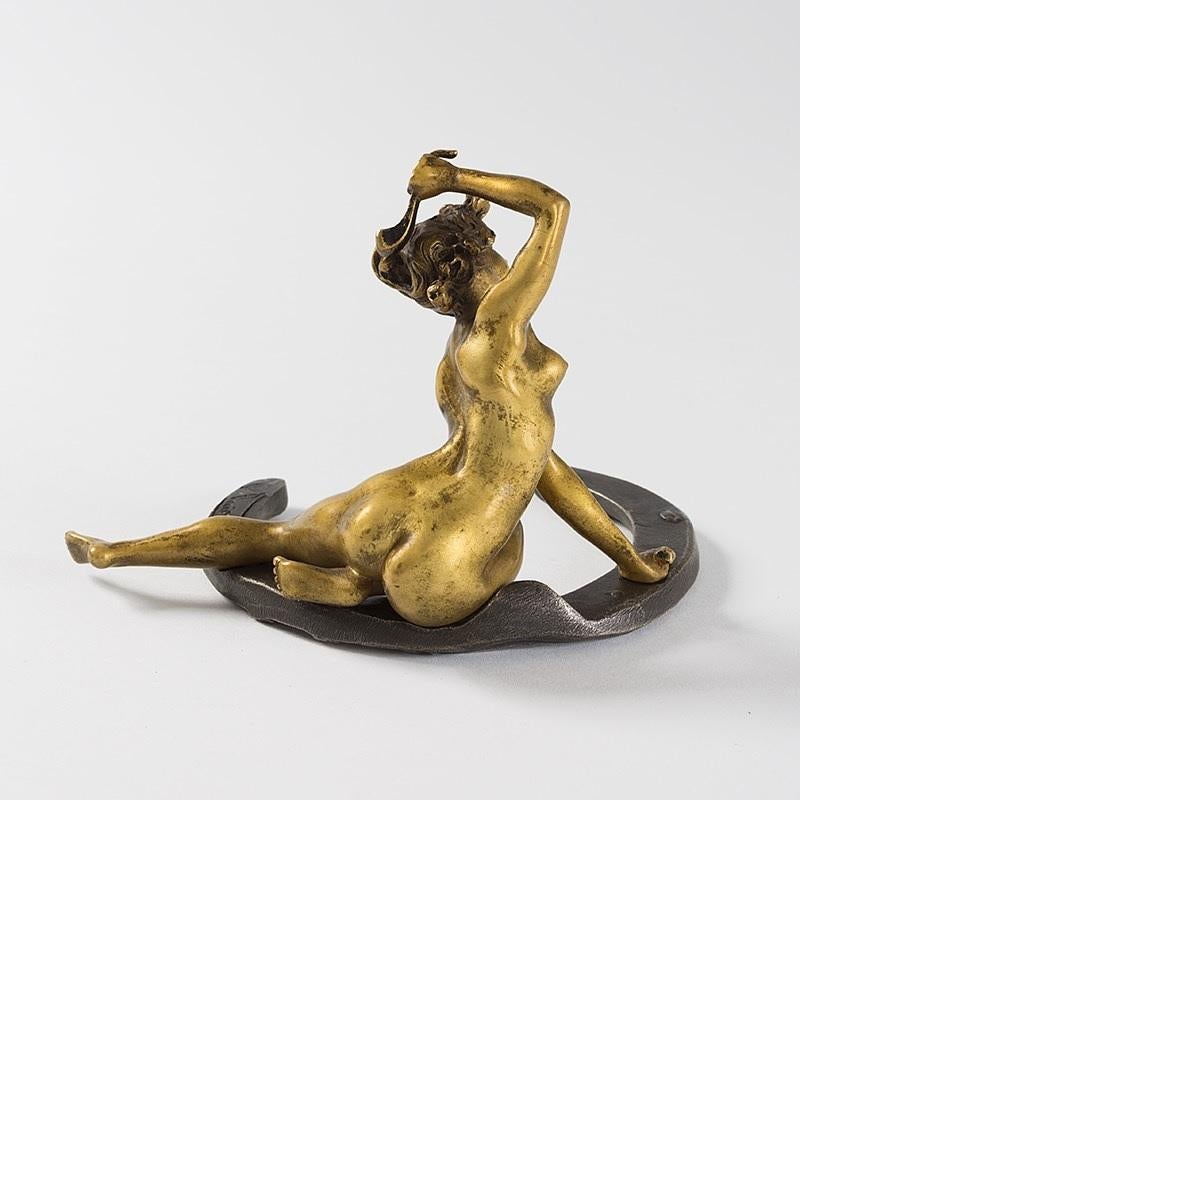 A French Art Nouveau gilt and patinated bronze figural sculpture, titled Porte-bonheure a la muse ou La Chance, by Georges Récipon (1860-1920). The desk weight is modeled as a female nude hammering nails into a horseshoe, circa 1900.

A similar